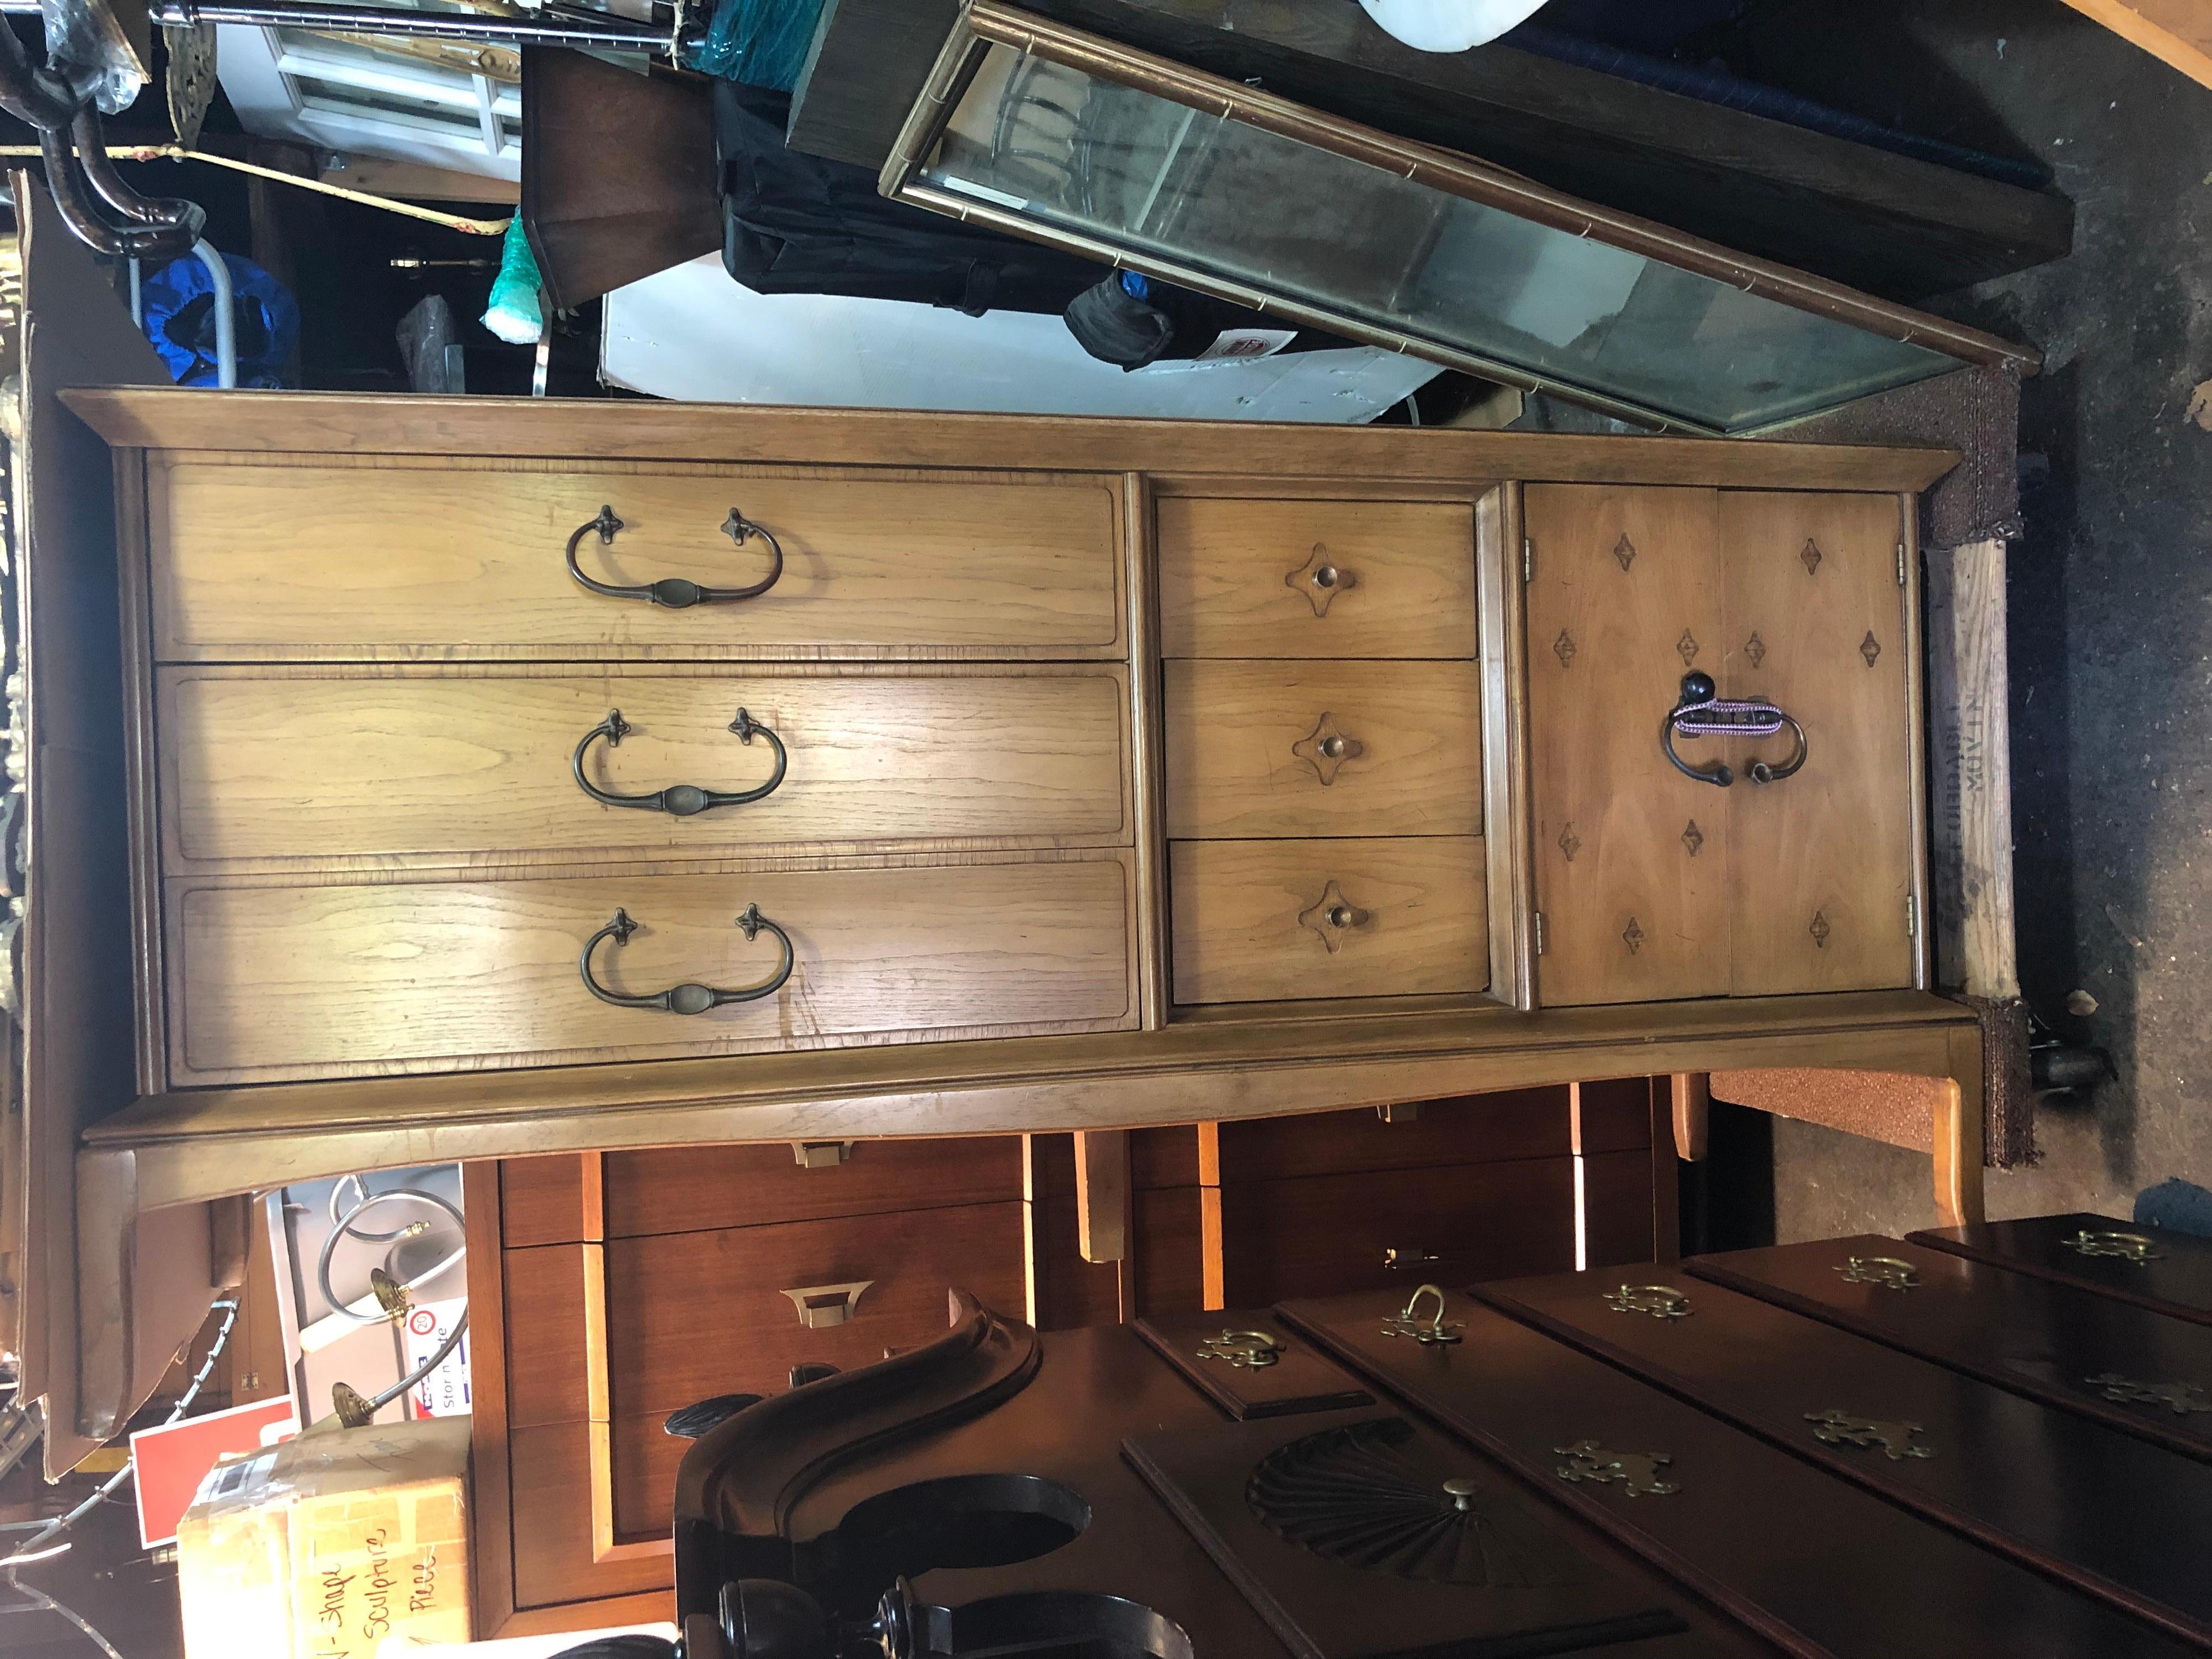 Long midcentury dresser or credenza in original condition. Has three long drawers, three short drawers and three concealed drawers behind doors. Solid, quality American made piece with no structural issues. This is in original condition with surface